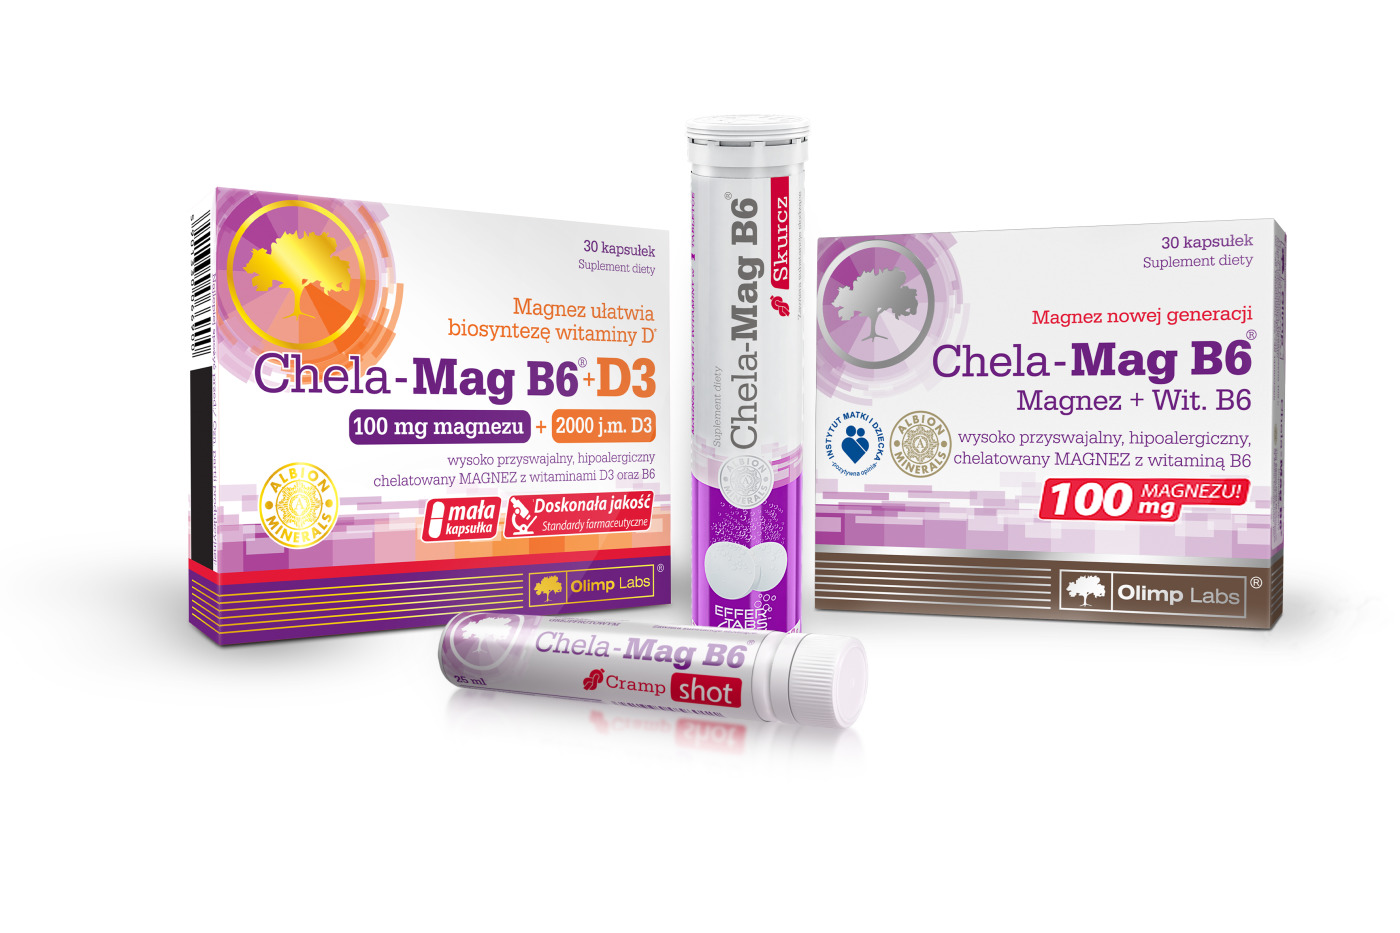 Chela-Mag B6 product line - magnesium of the new generation